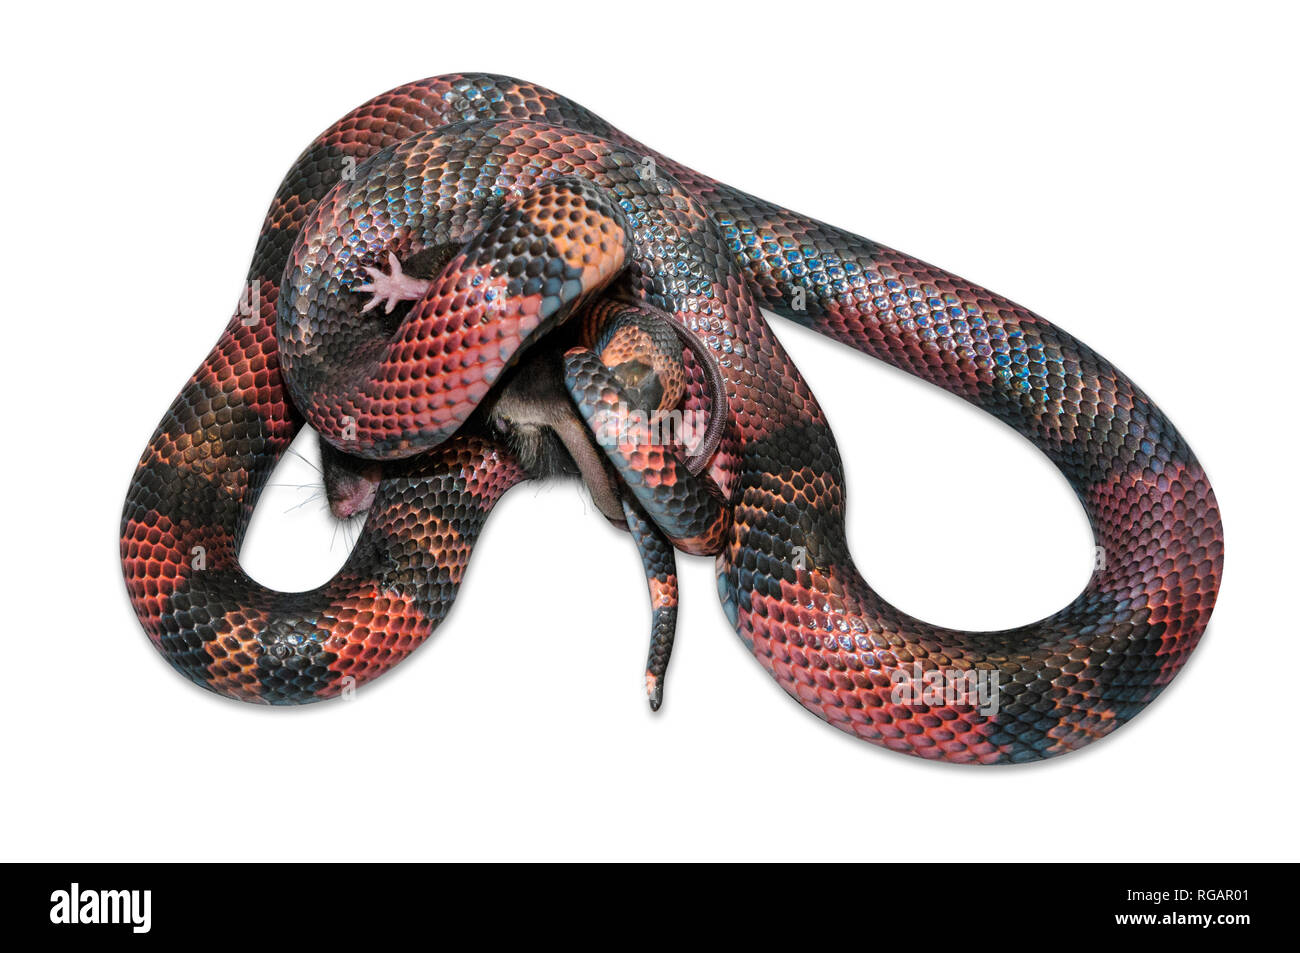 Nicaraguan Milk Snake (Lampropeltis triangulum) killling a brown mouse (Mus musculus). White background cut out. Stock Photo